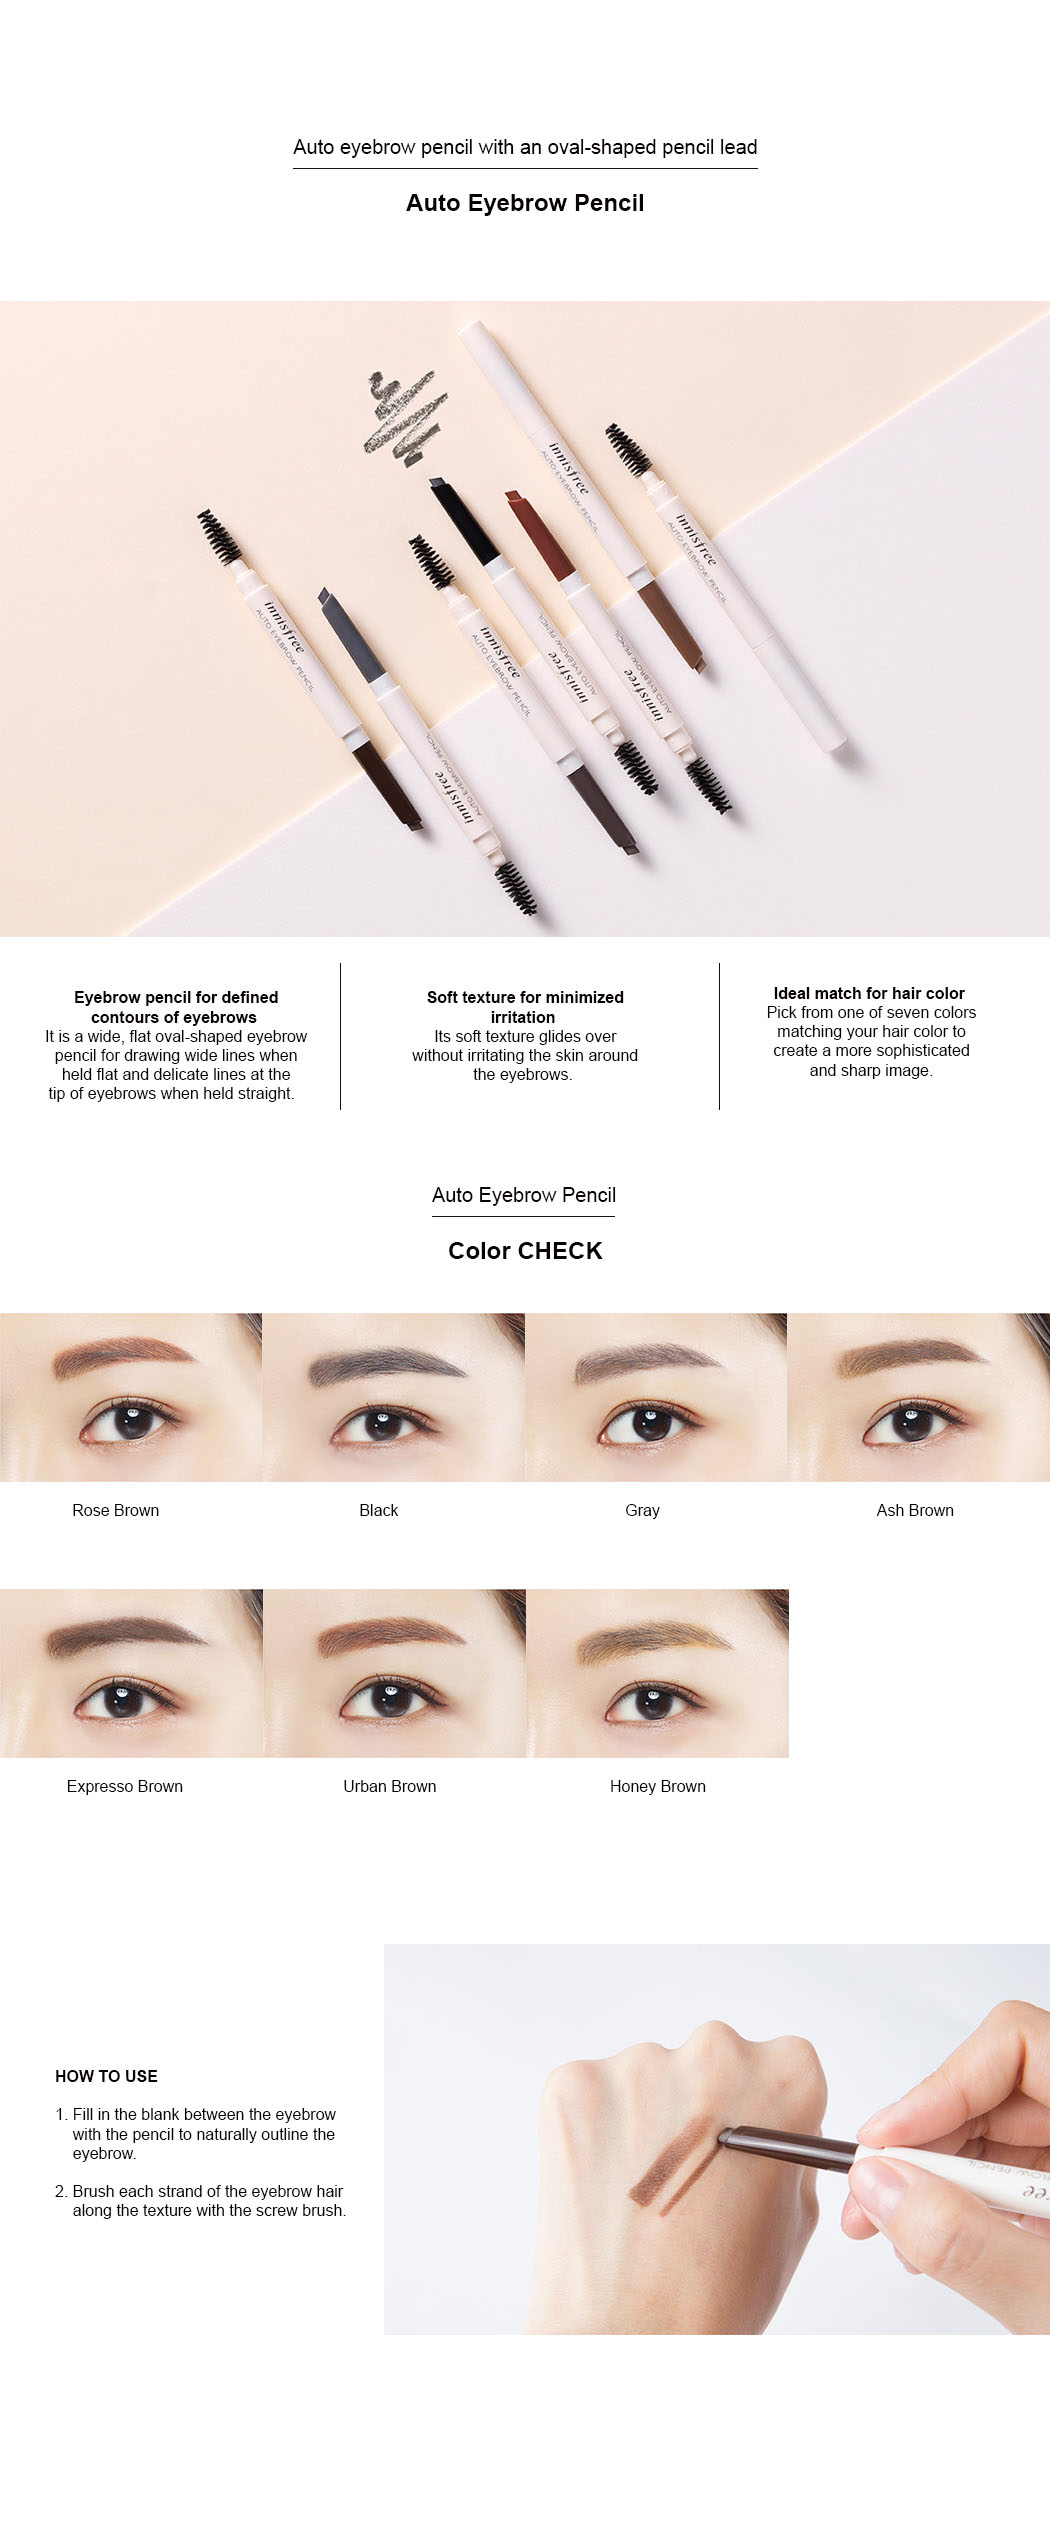 Auto Eyebrow Pencil 0.3g How to Use Description Ingredients